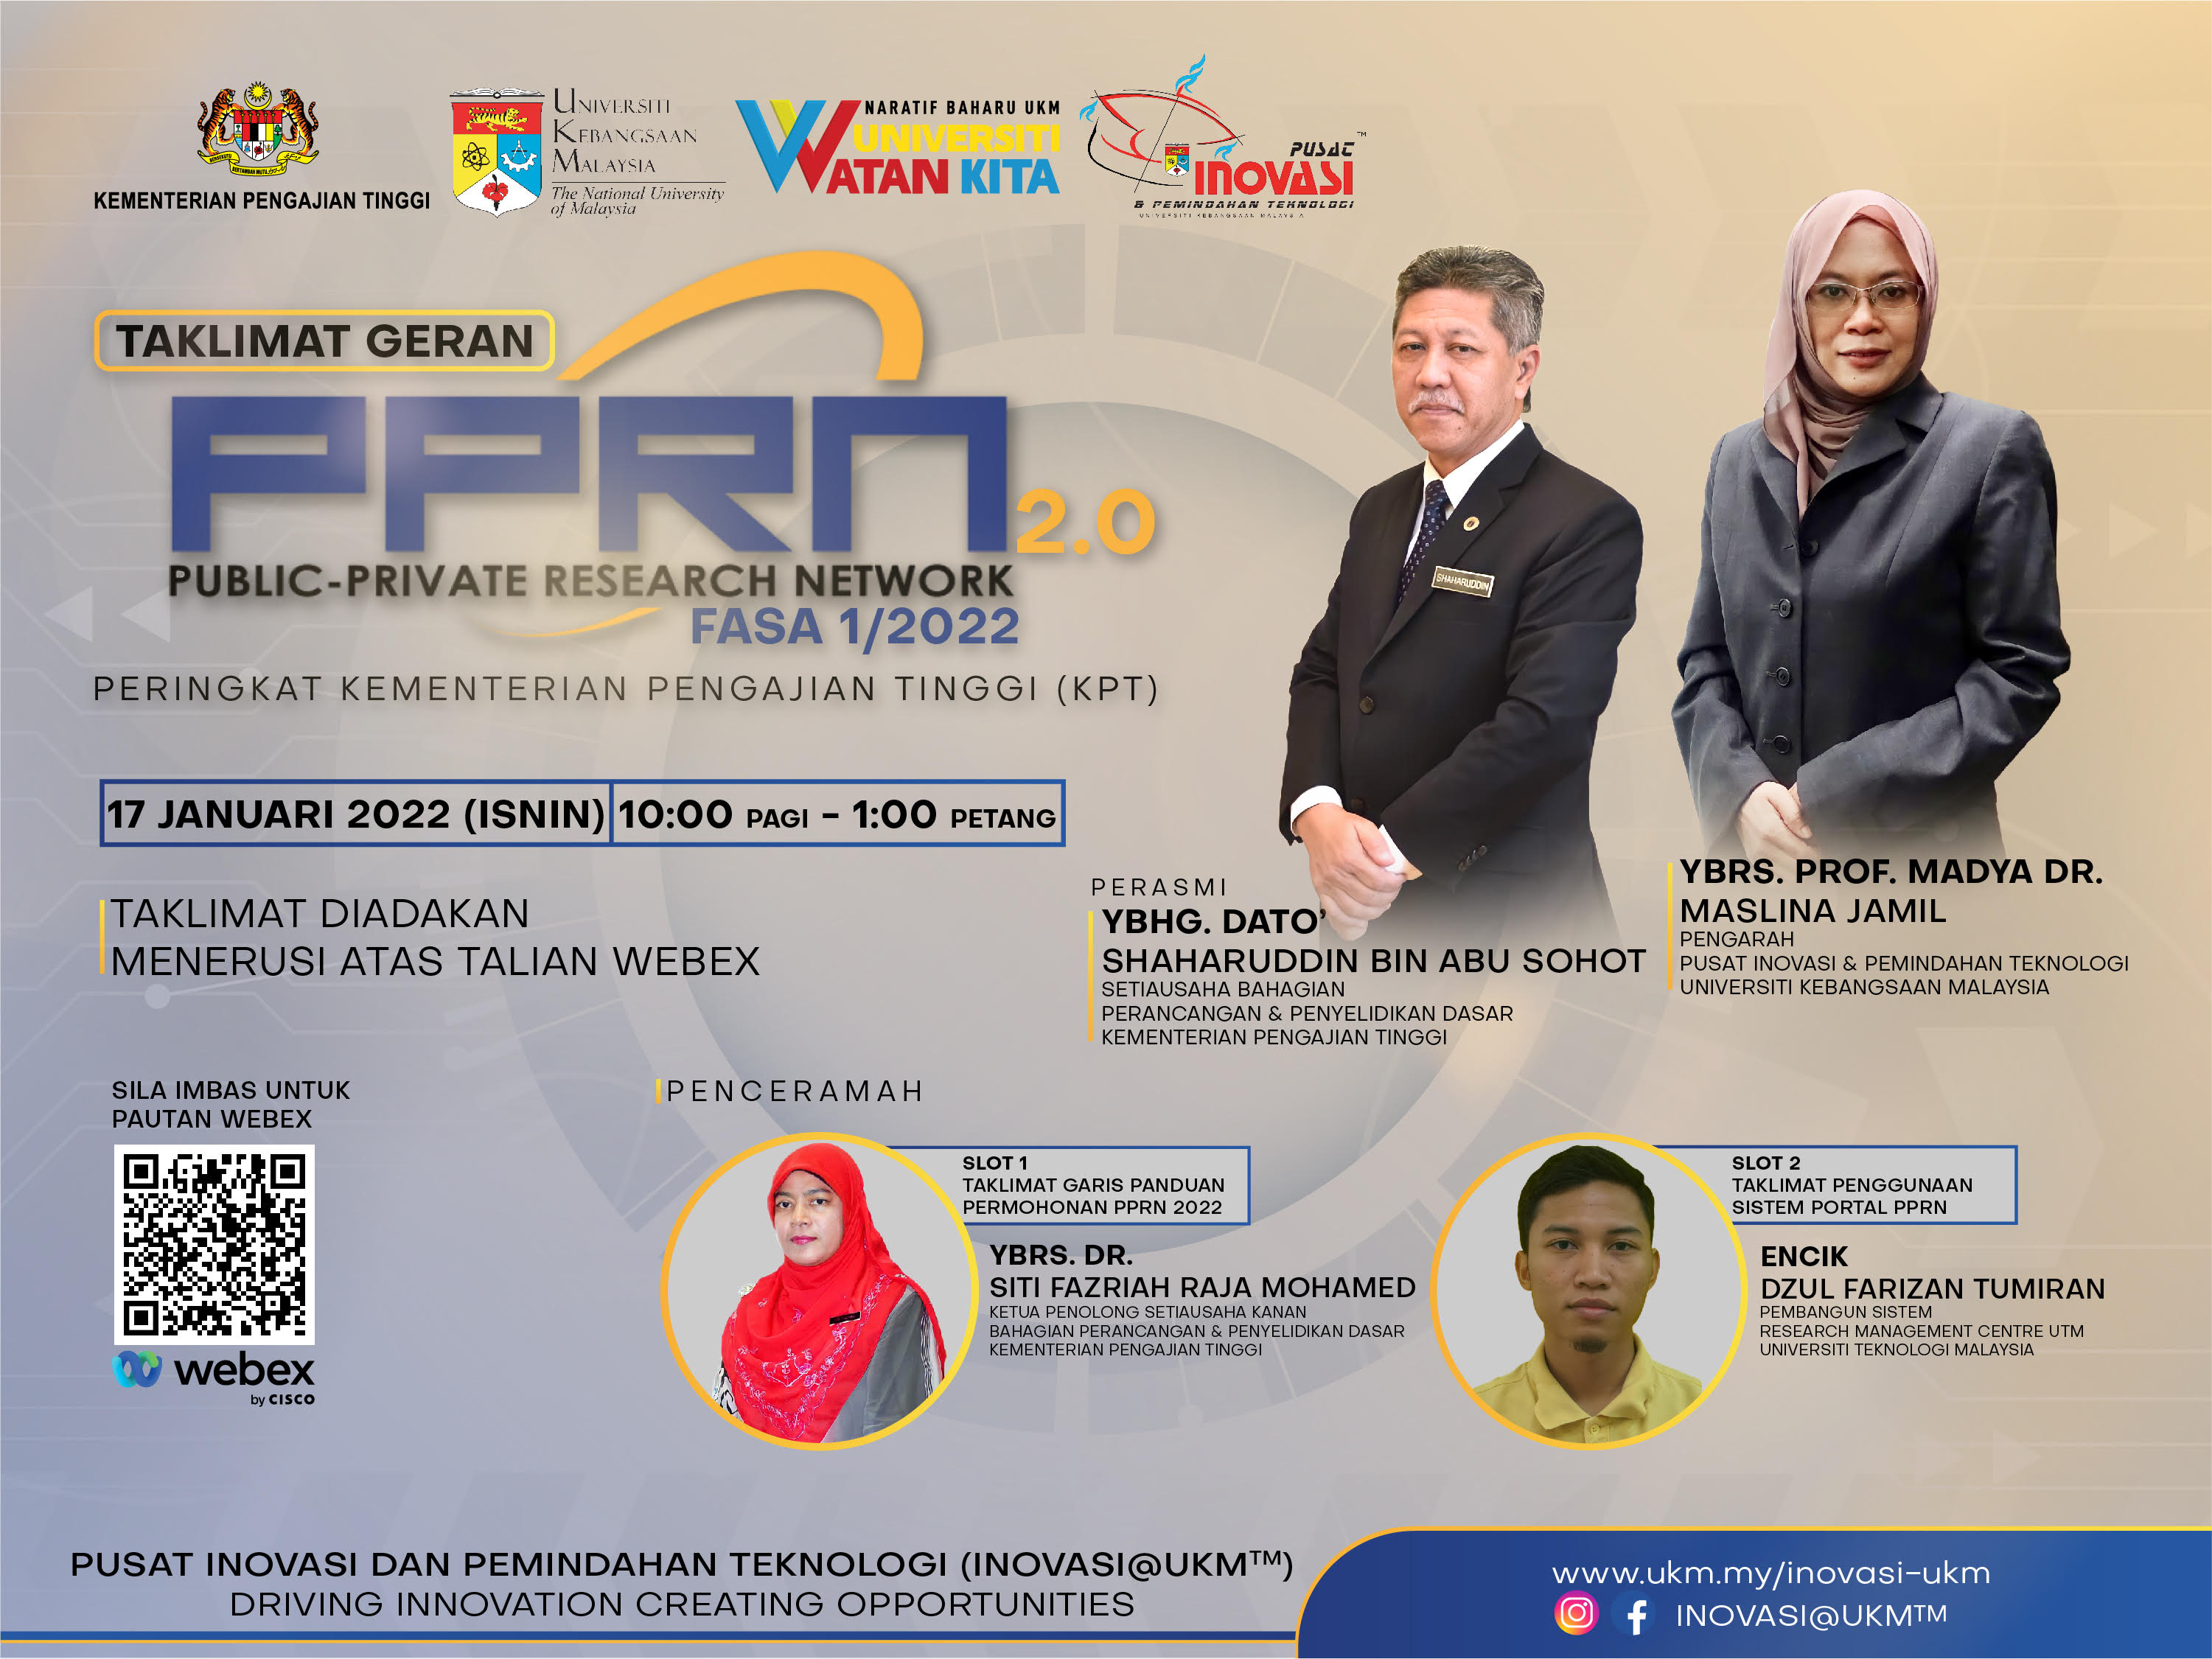 PUBLIC-PRIVATE RESEARCH NETWORK 2.0 GRANT BRIEFING YEAR 2022 BY THE MINISTRY OF HIGHER EDUCATION (MOHE)